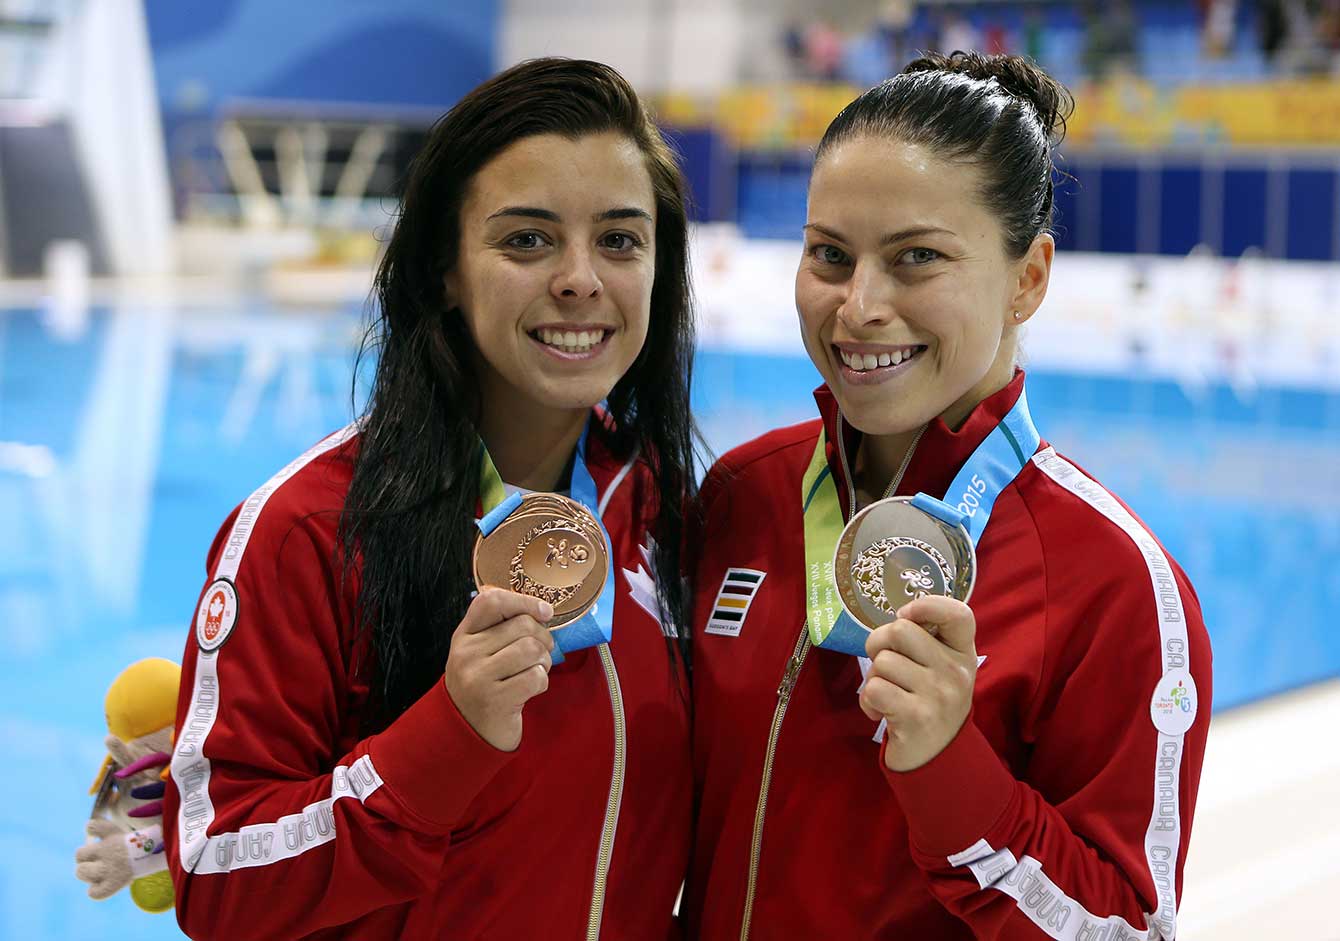 Canada's Meaghan Benfeito, the 10m platform bronze medallist, with Roseline Filion who won silver. 